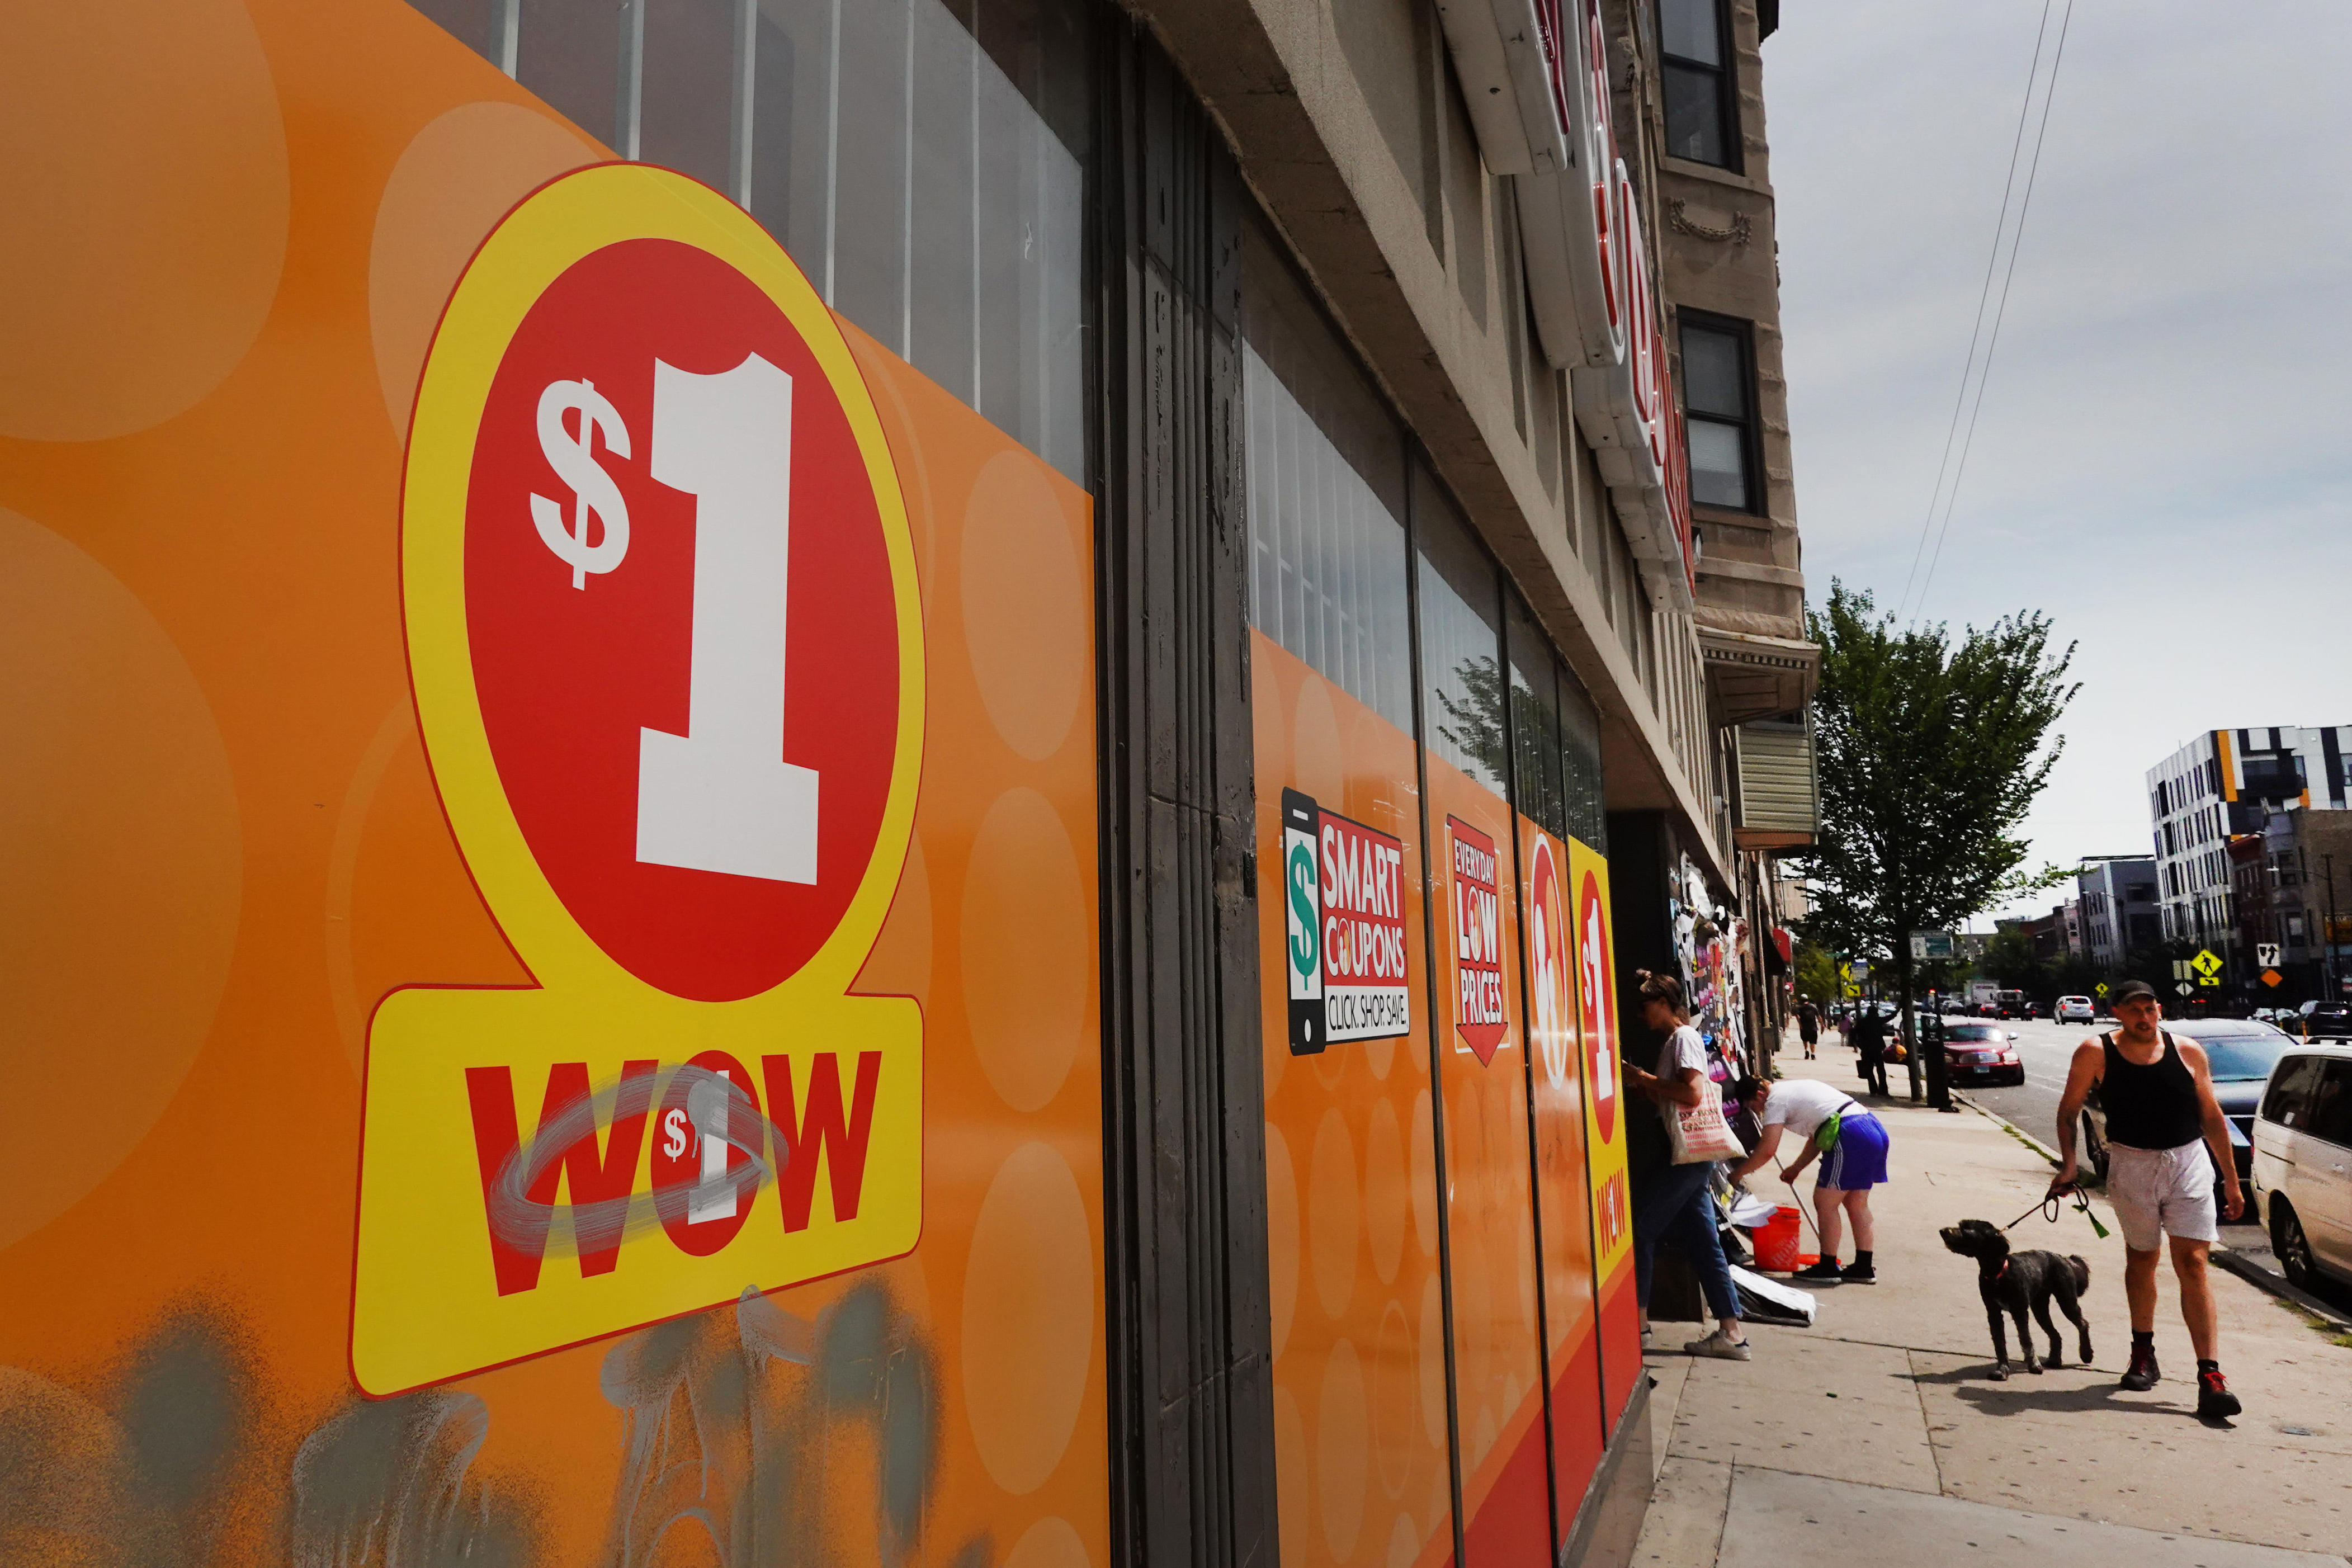 dollar store chains would be prohibited from opening stores within one mile of each other if a proposed chicago law passes